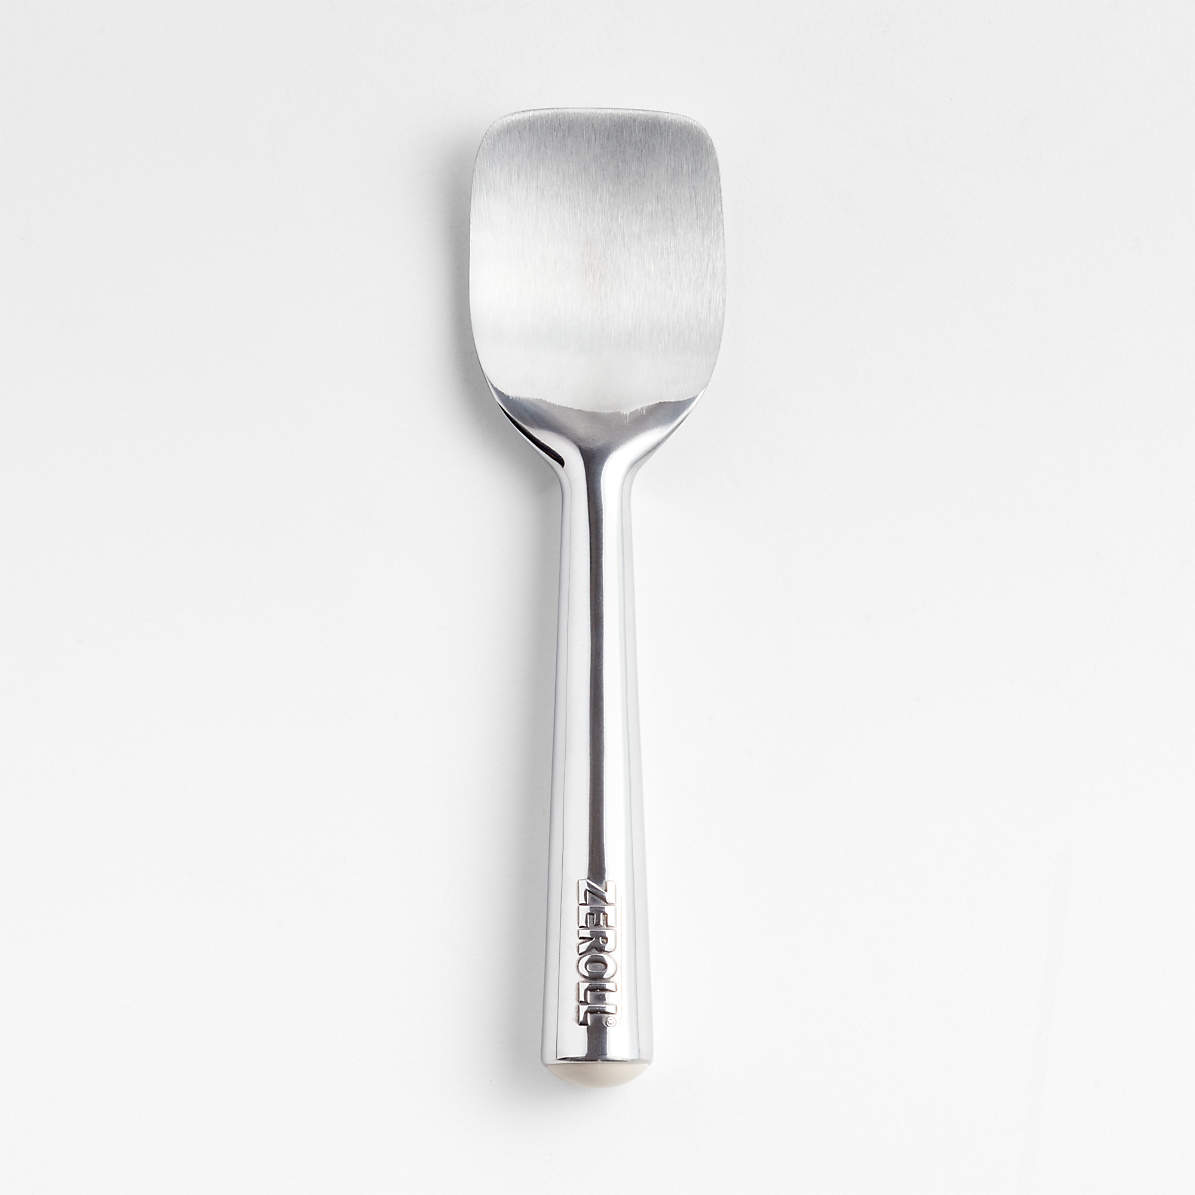 Tovolo Tilt-Up White Ice Cream Scoop + Reviews, Crate & Barrel Canada